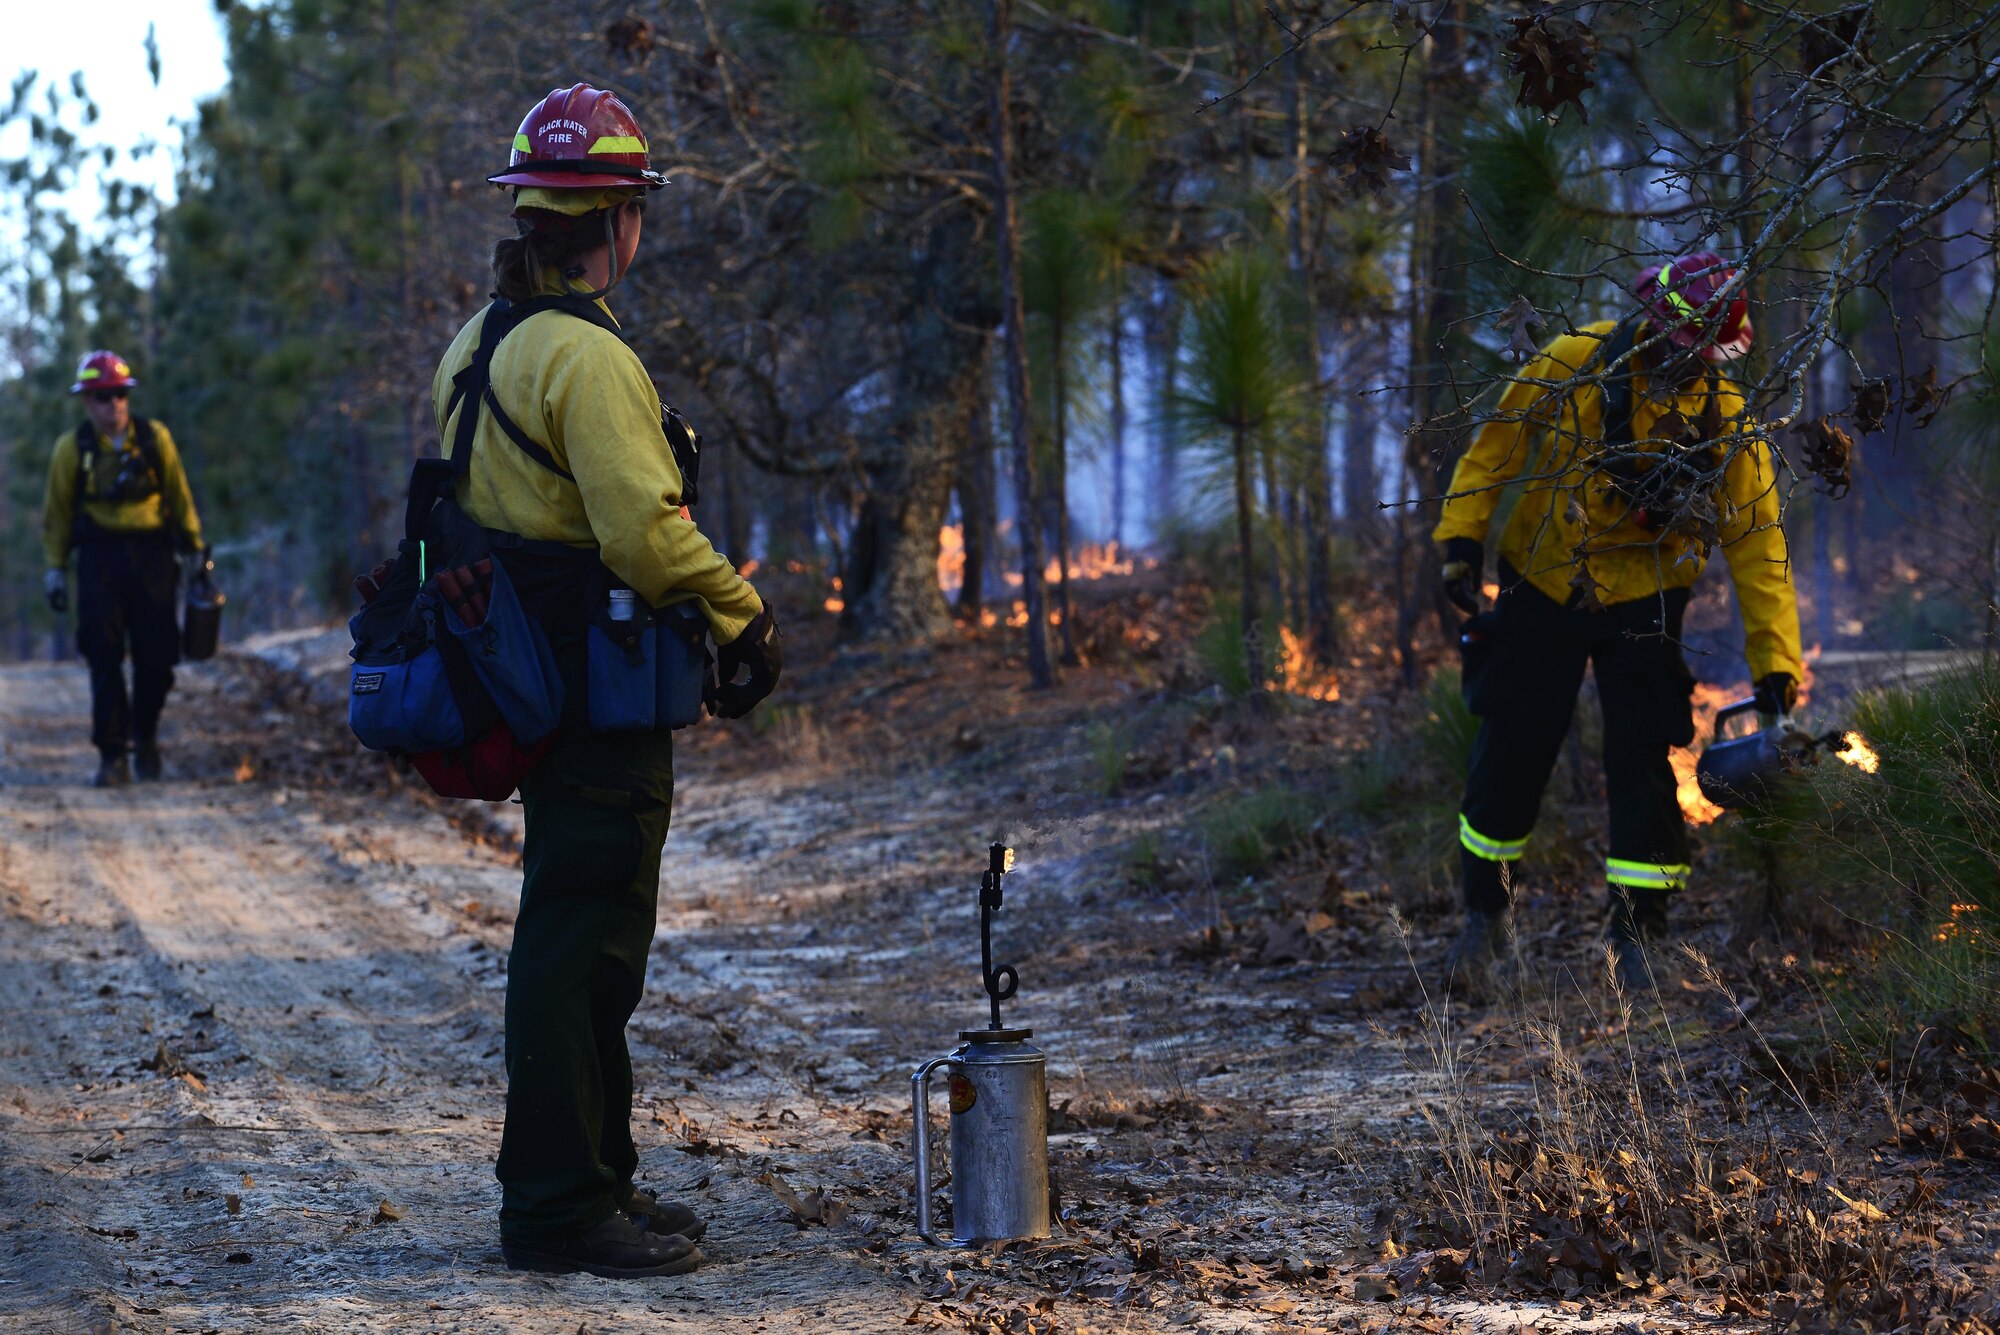 Members of the prescribe burn team light fires on the forest floor during prescribed burning Jan. 28, 2015, at Poinsett Electronic Combat Range, in Sumter, S.C. The team was scheduled to burn throughout the week while the weather permitted. (U.S. Air Force photo/Airman 1st Class Diana M. Cossaboom)